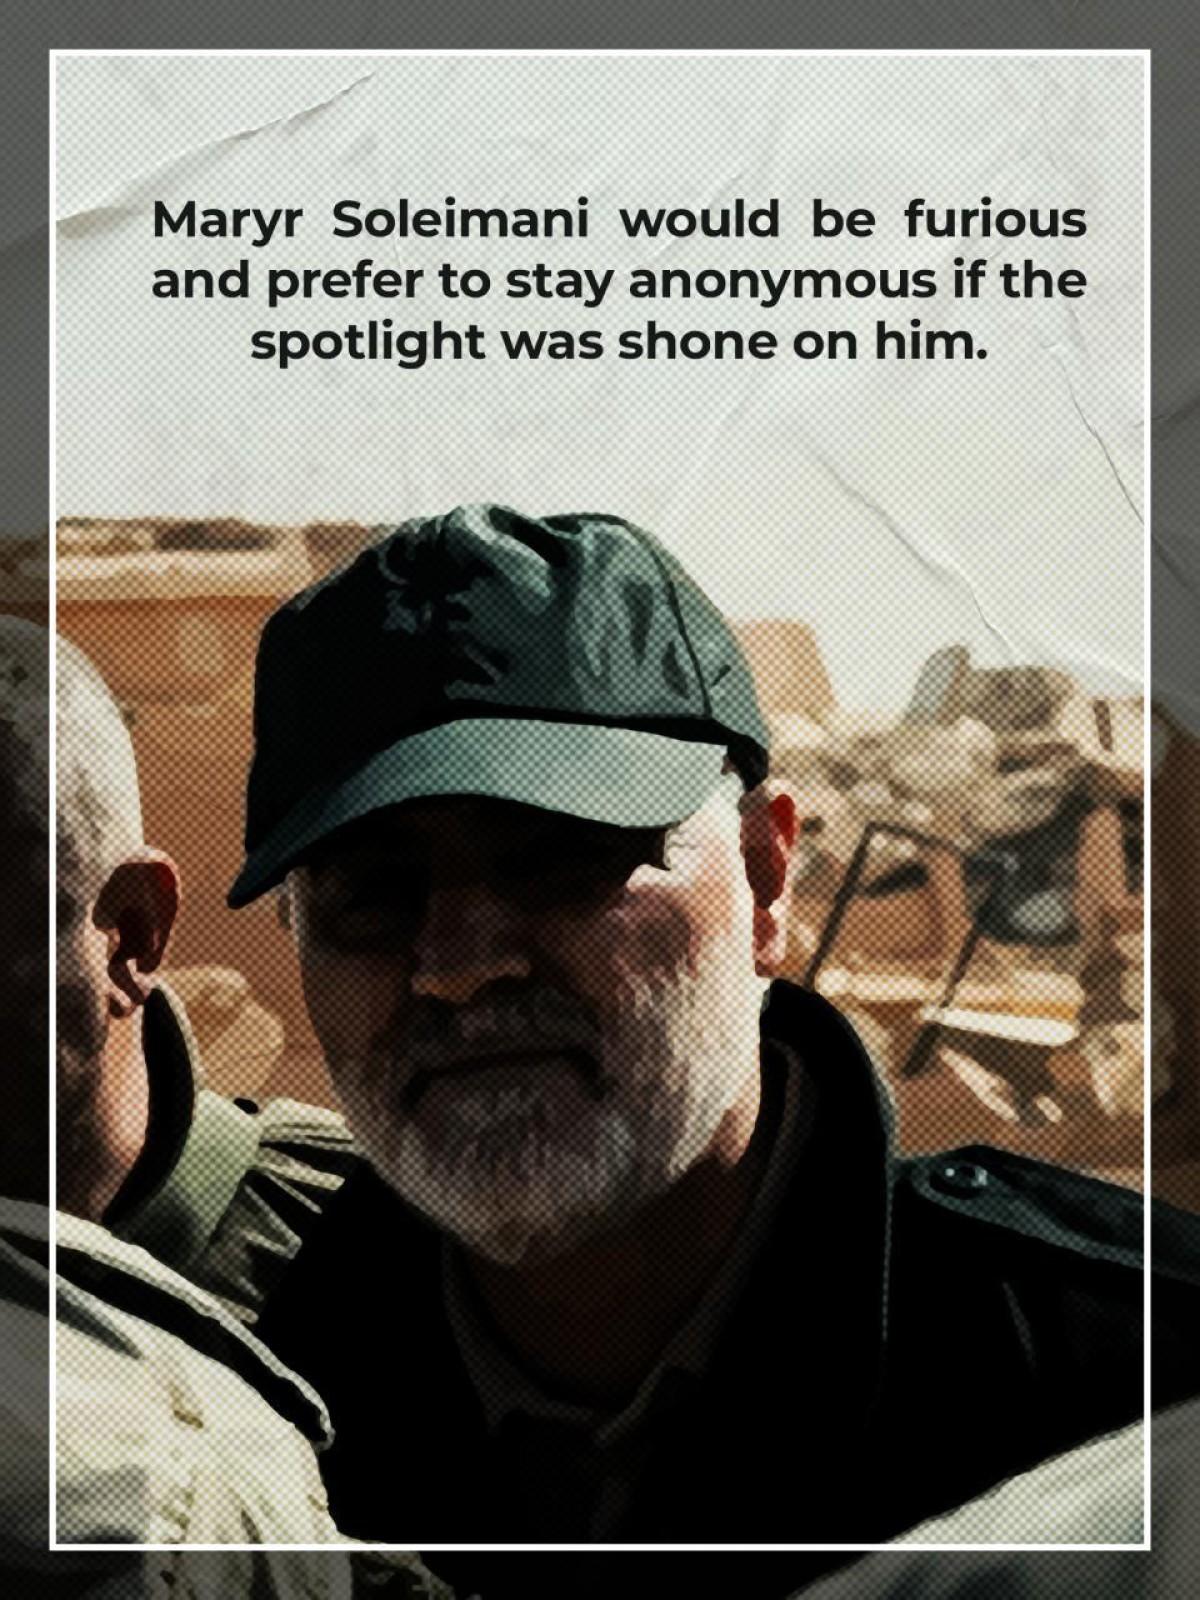 Martyr Soleimani would be furious and prefer to stay anonymous if the spotlight was shone on him